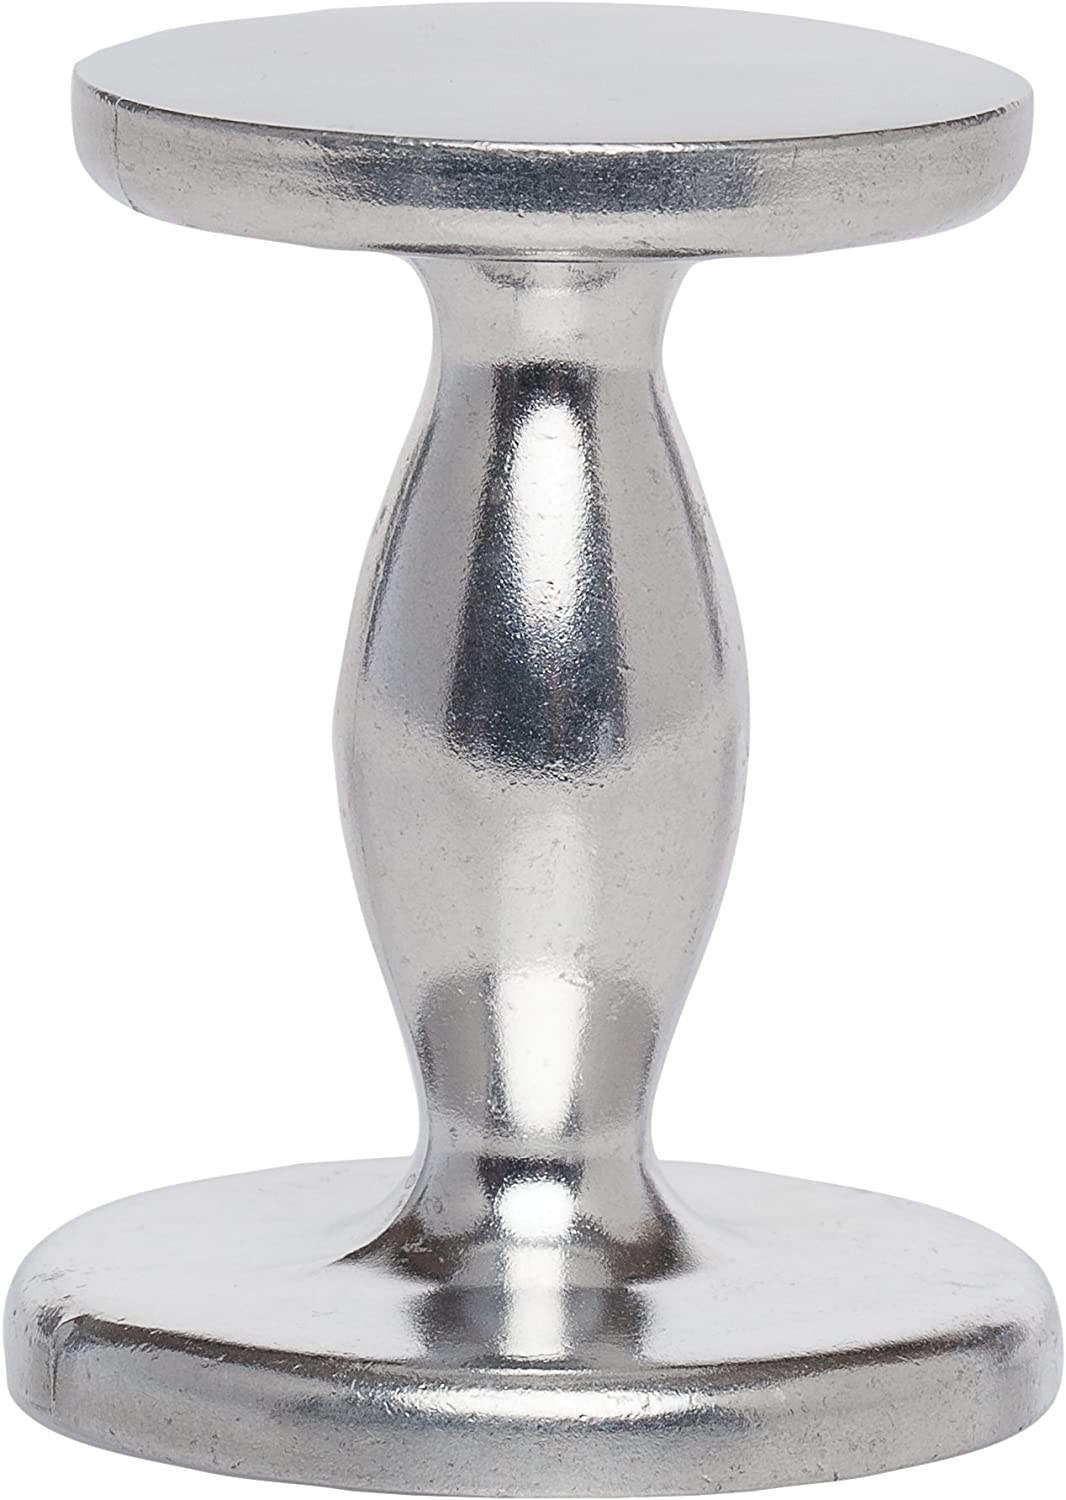 Fino Dual-Sided Espresso Tamper, 4-Ounce Weight, 50-Millimeter and 55-Millimeter, Heavyweight Aluminum Import To Shop ×Product